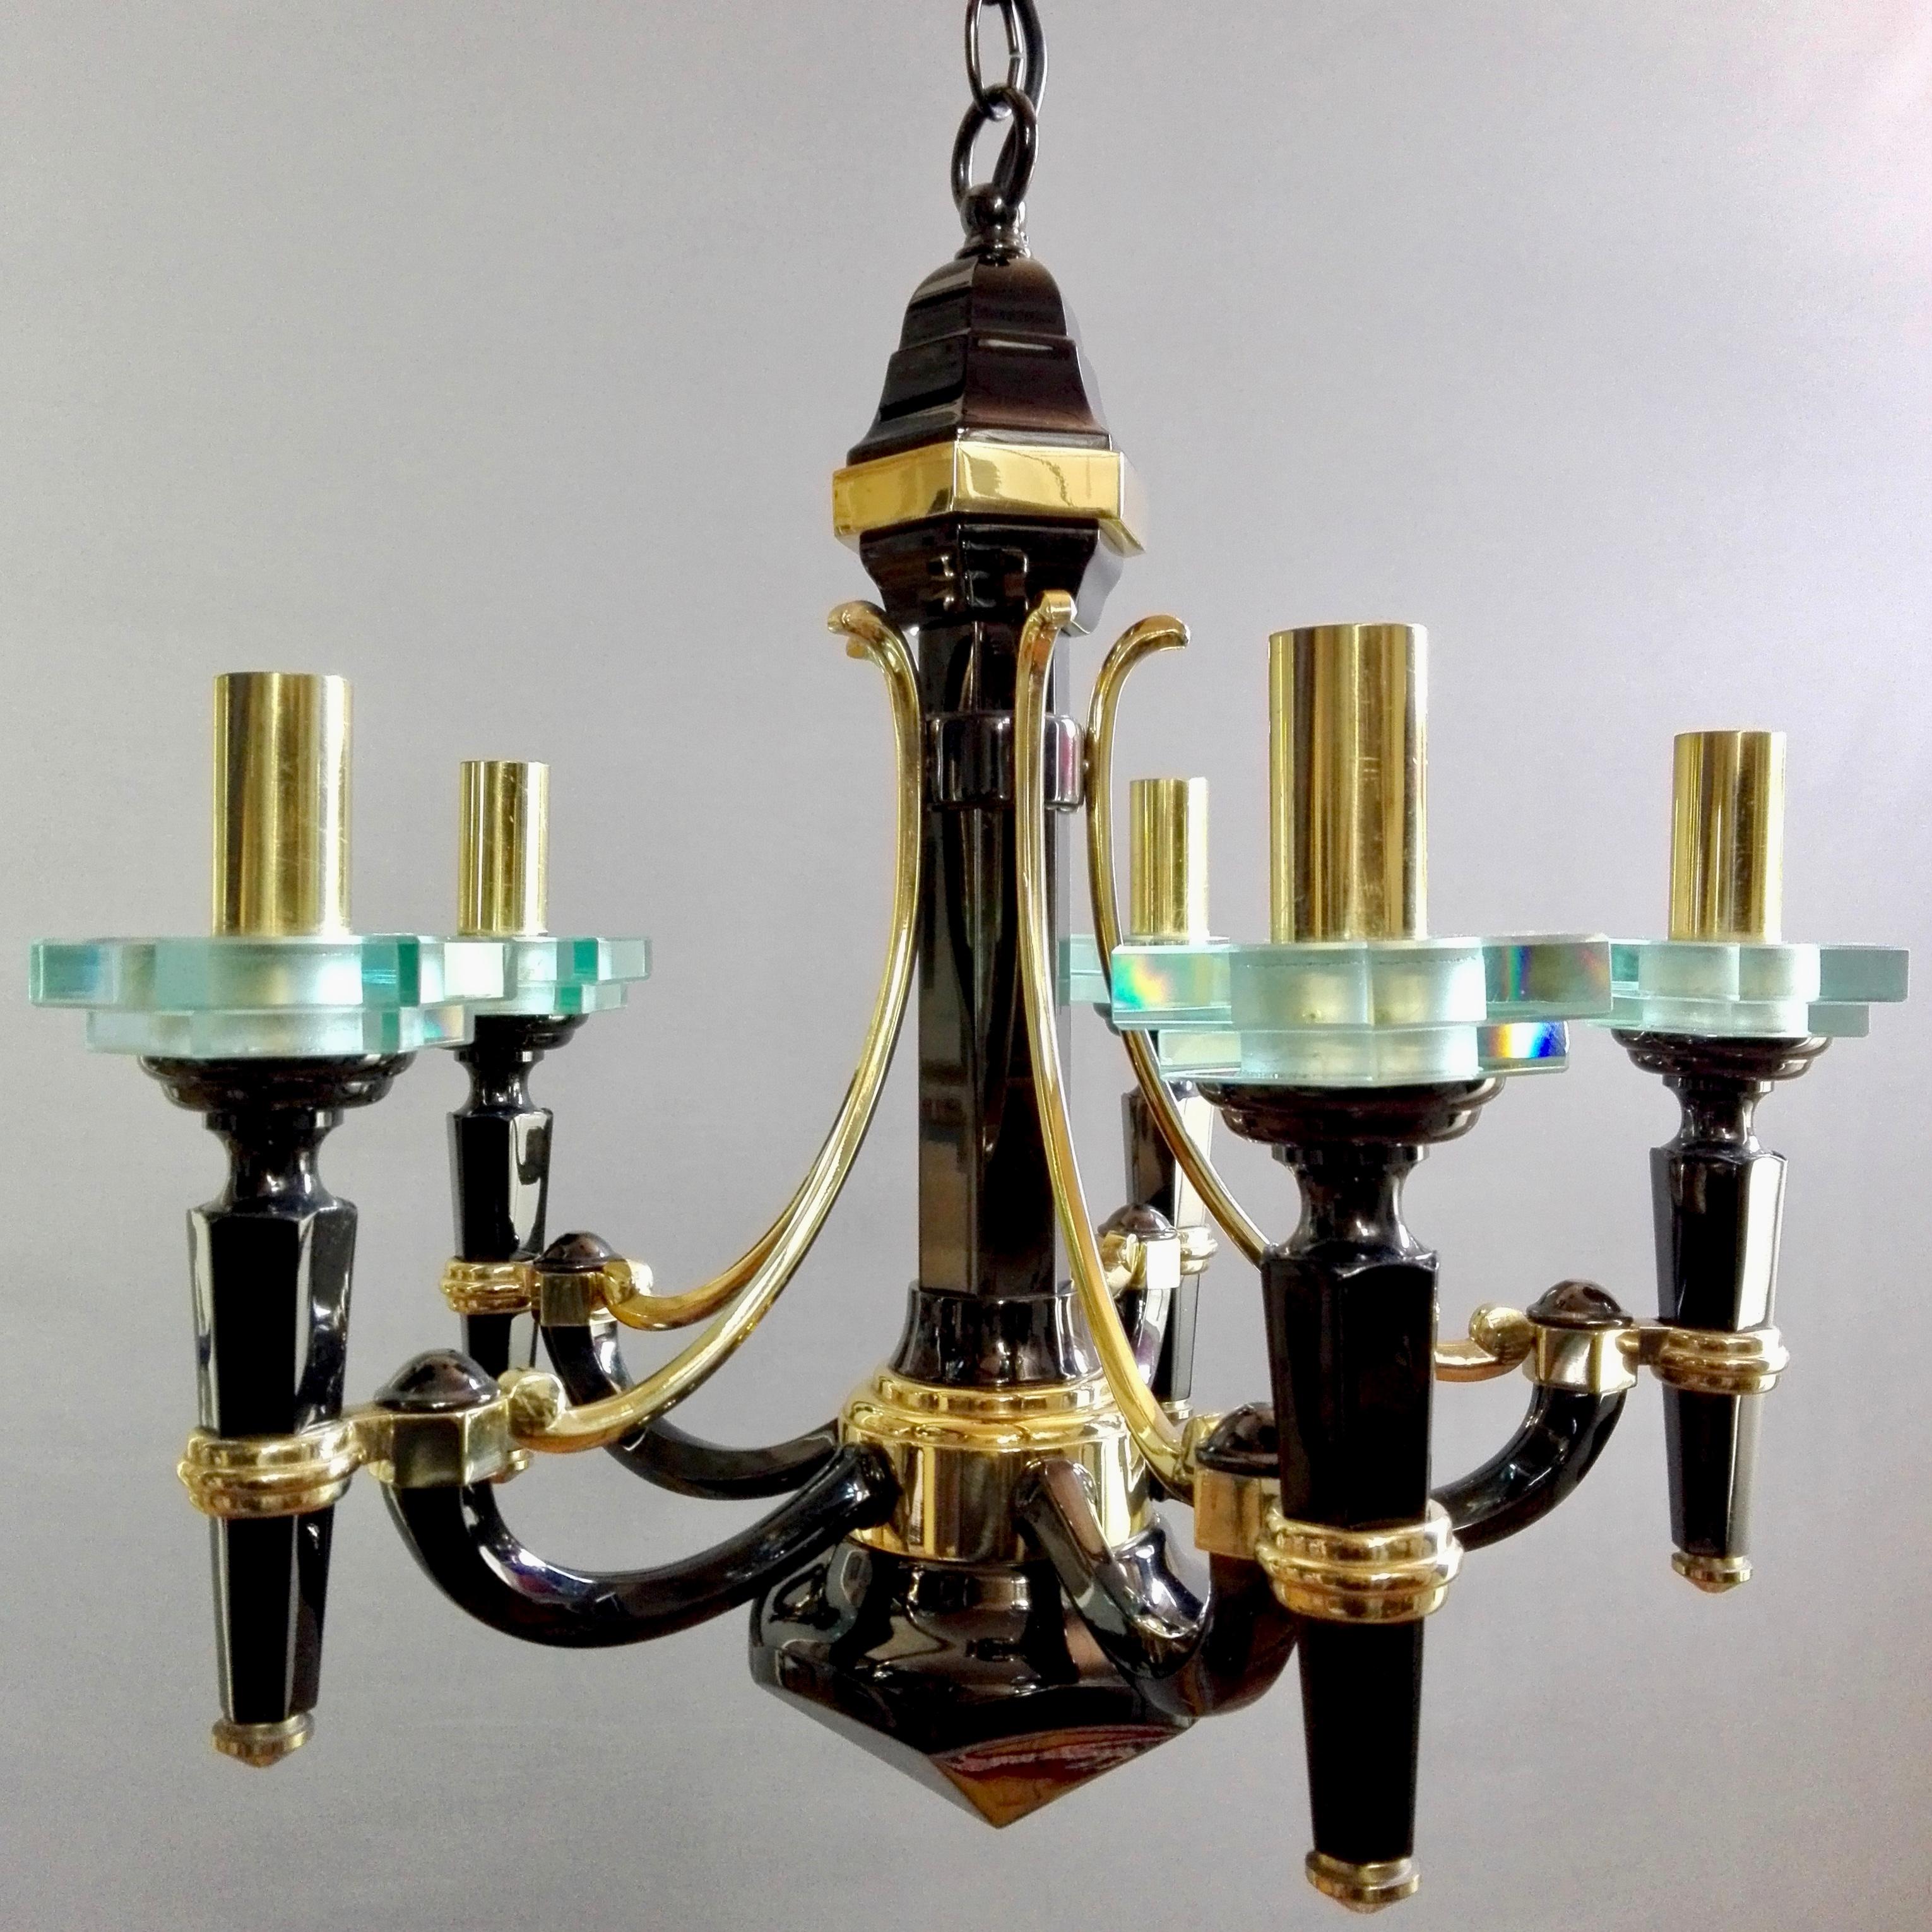 Italian Lampart Milano attributable 70s Five-Light Chandelier, Solid Brass and Crystals. For Sale